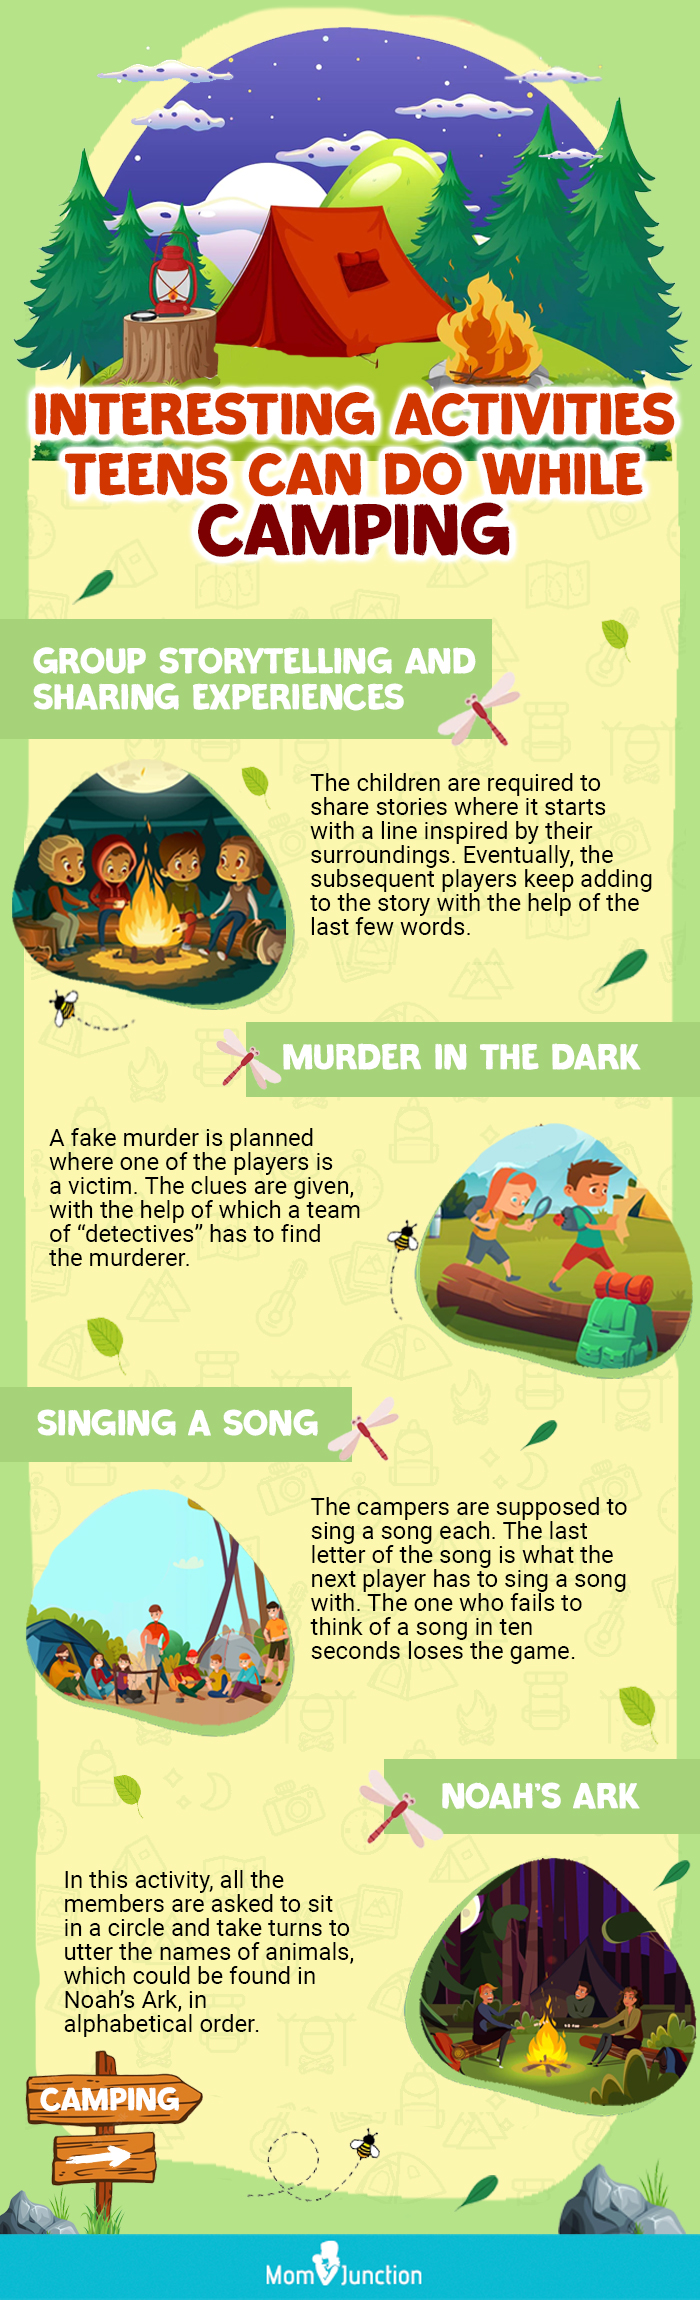 interesting activities teens can do while camping [infographic]